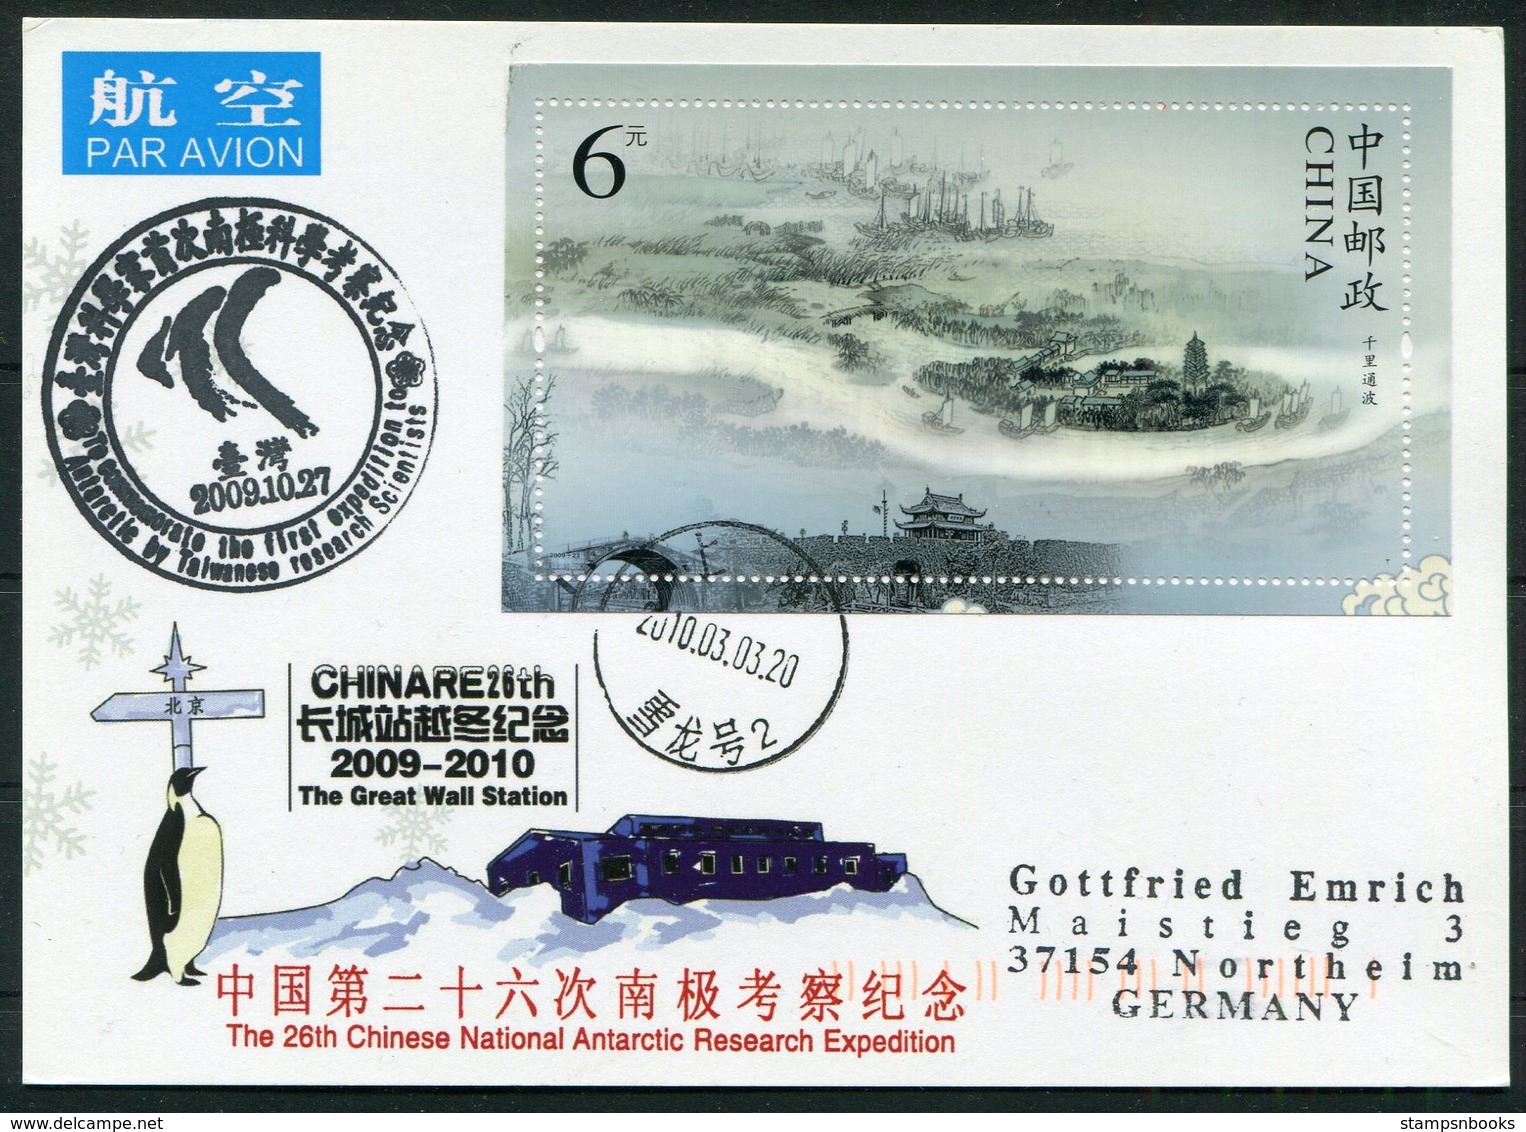 2009/10 China Antarctica Polar Antarctic CHINARE Expedition Penguin, Great Wall Station Postcard. - Covers & Documents